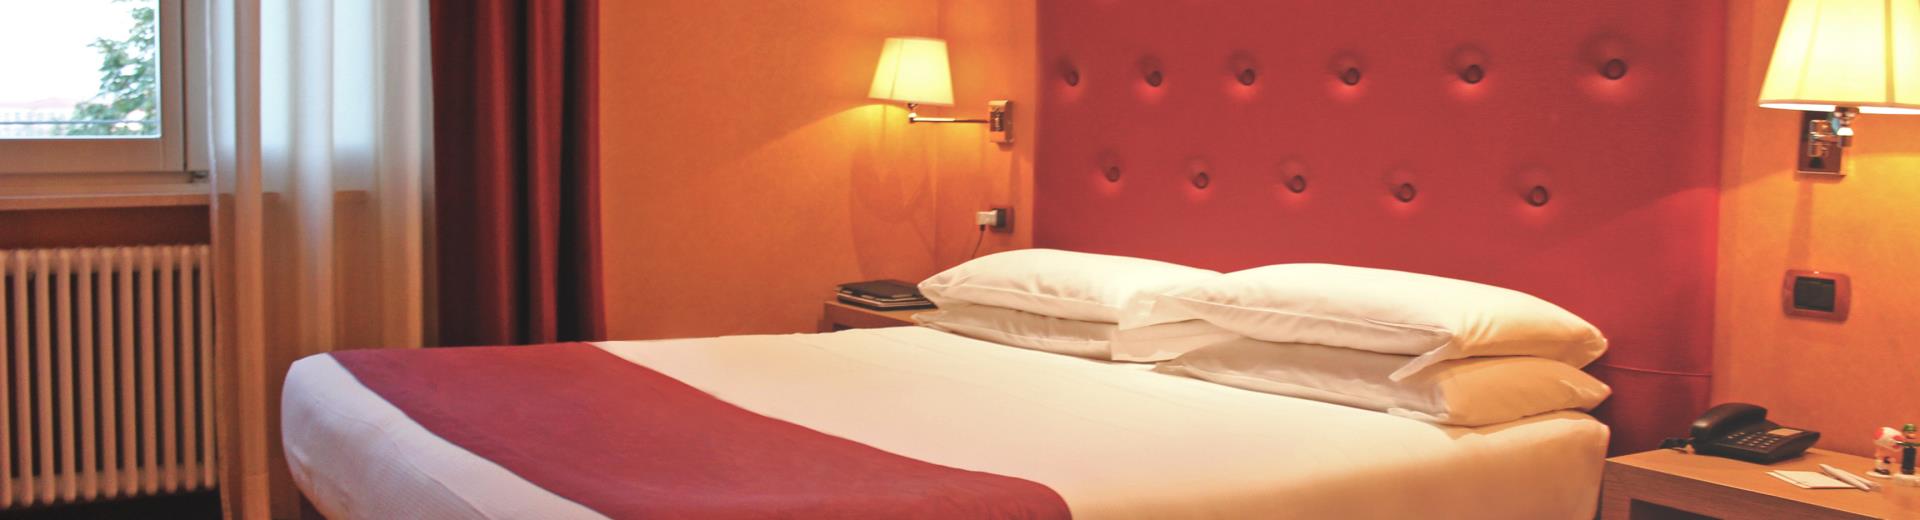 Check out the 4 star amenities at the Best Western Hotel Piemontese Bergamo!